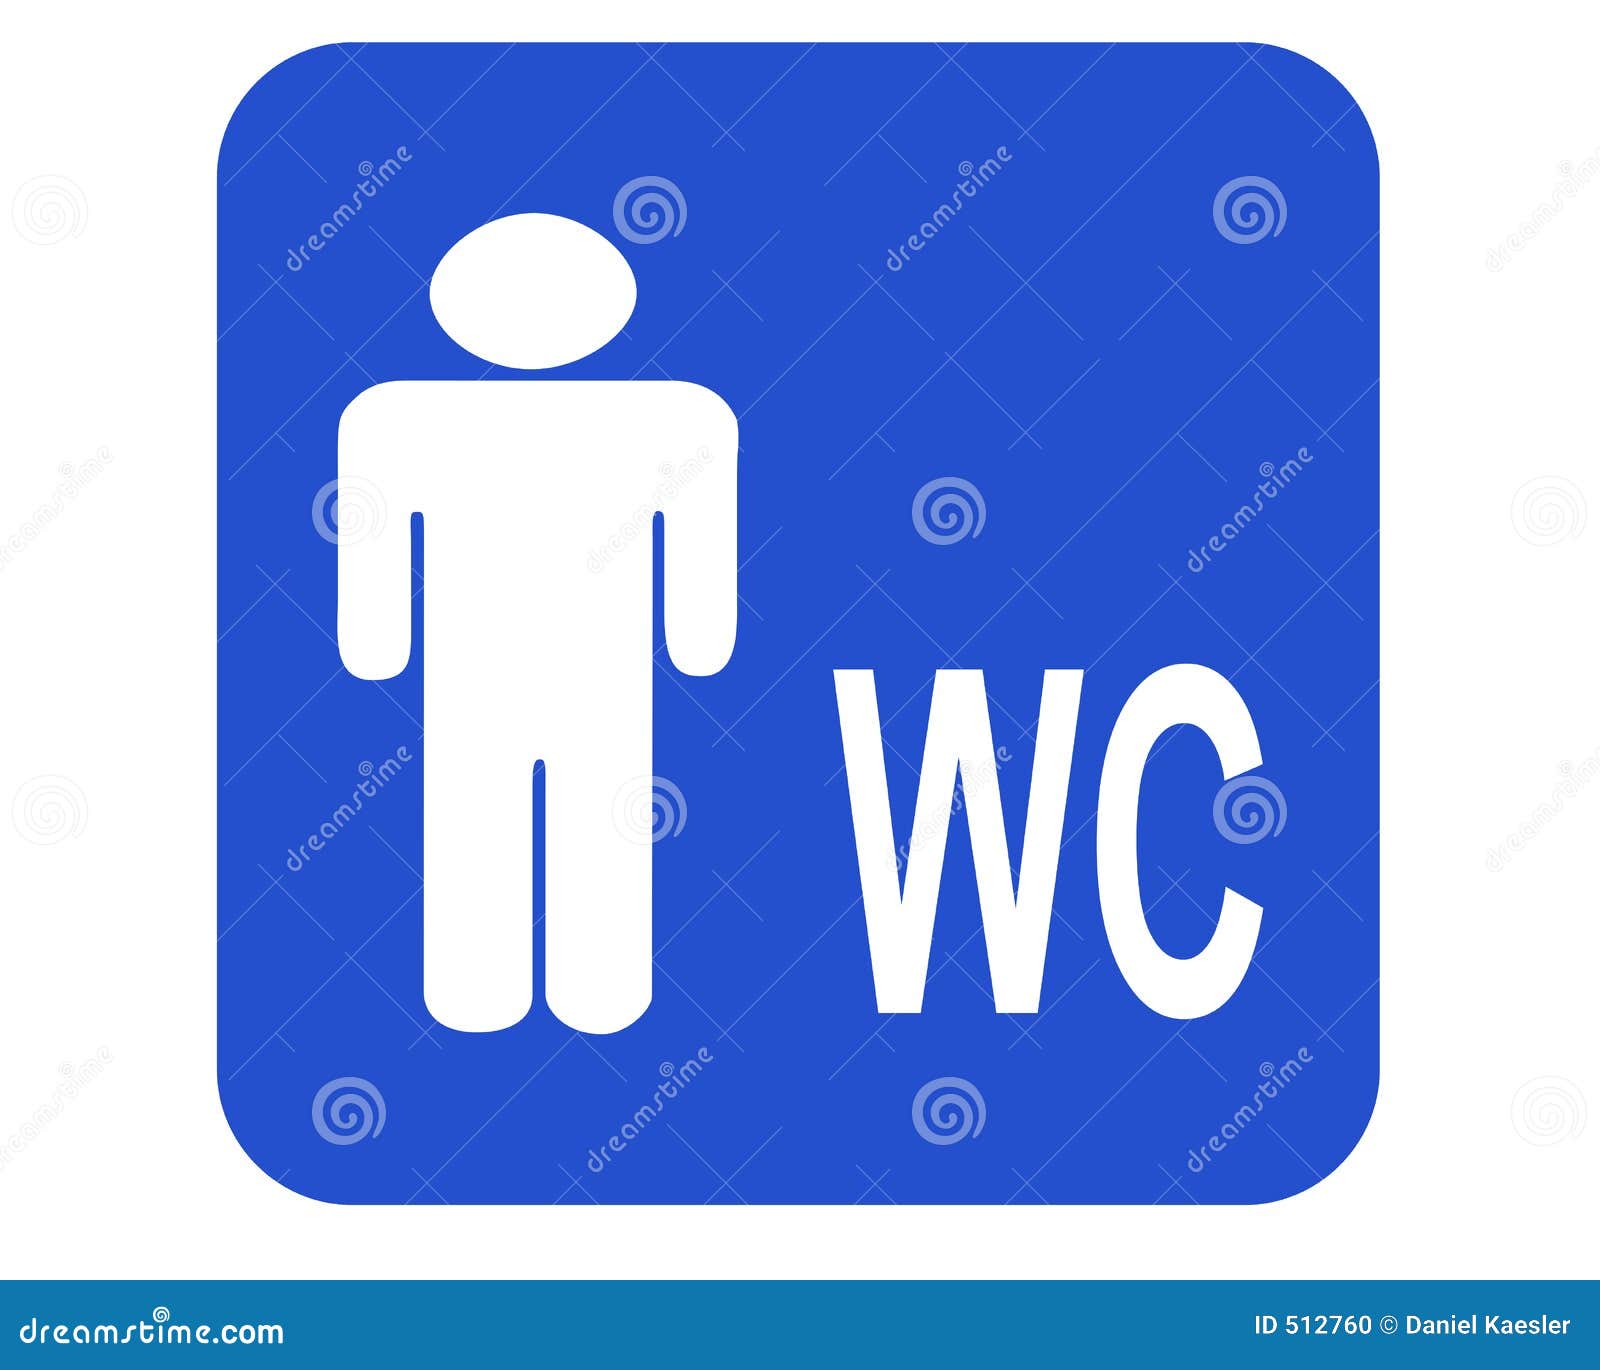 image clipart wc - photo #18